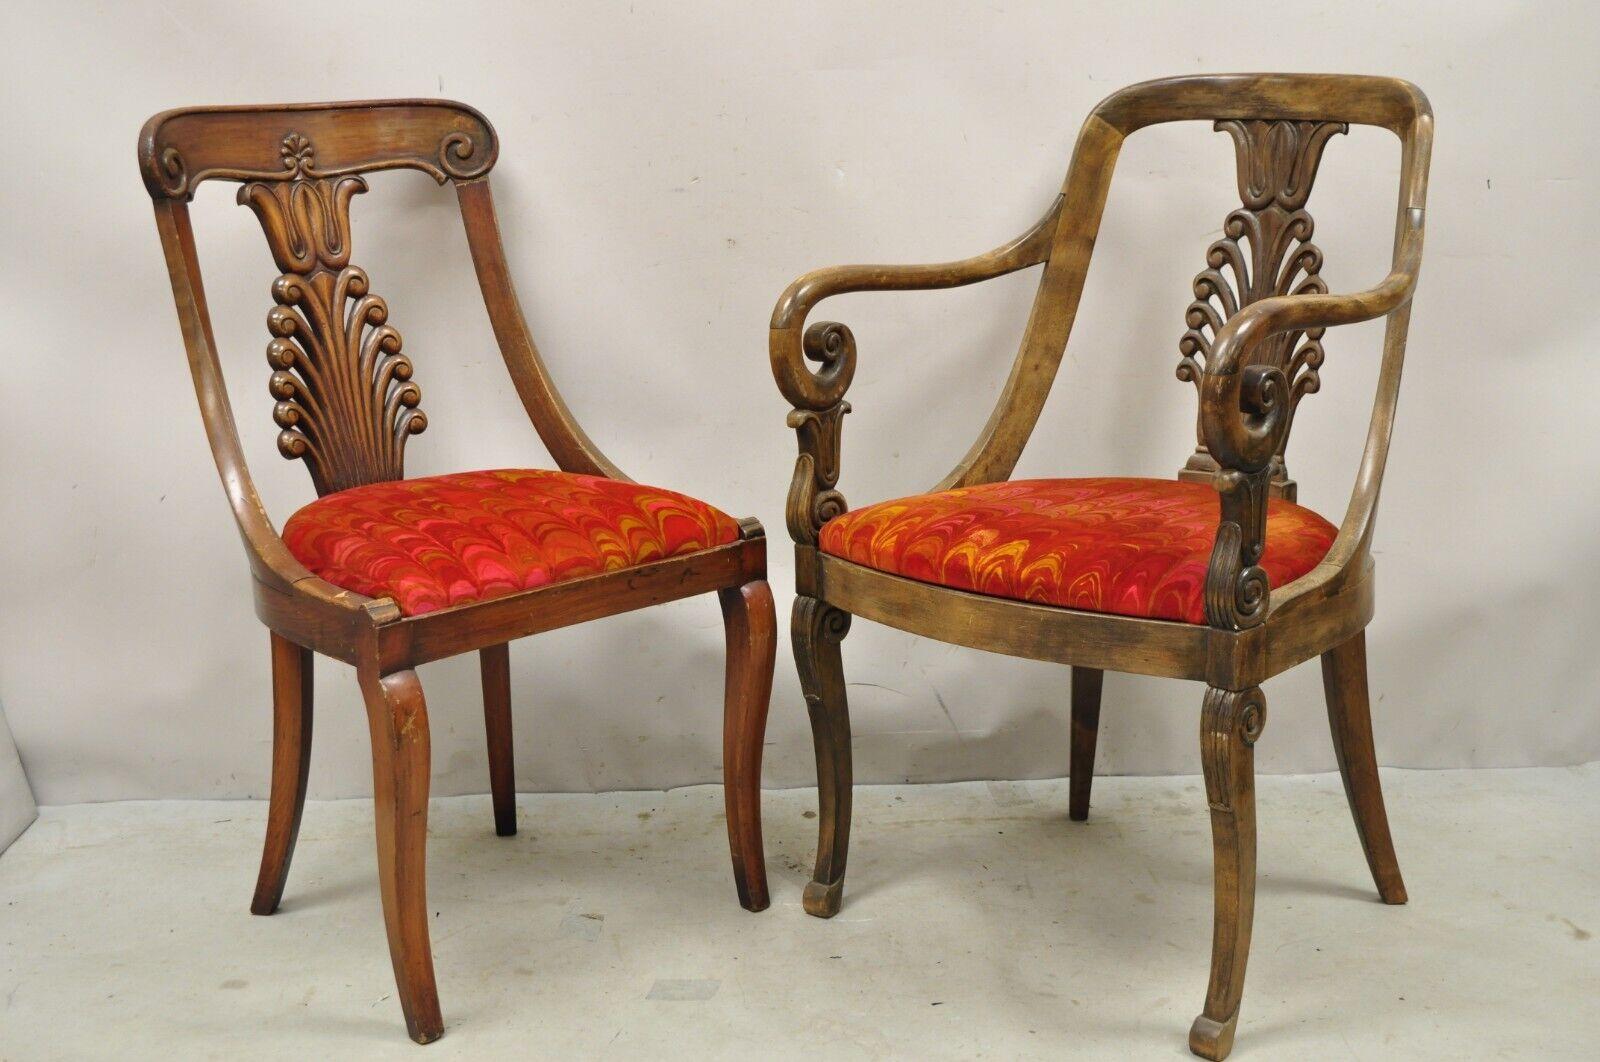 Vintage Regency Style Plume Carved Walnut Saber Leg Dining Chairs - Set of 6 In Good Condition For Sale In Philadelphia, PA